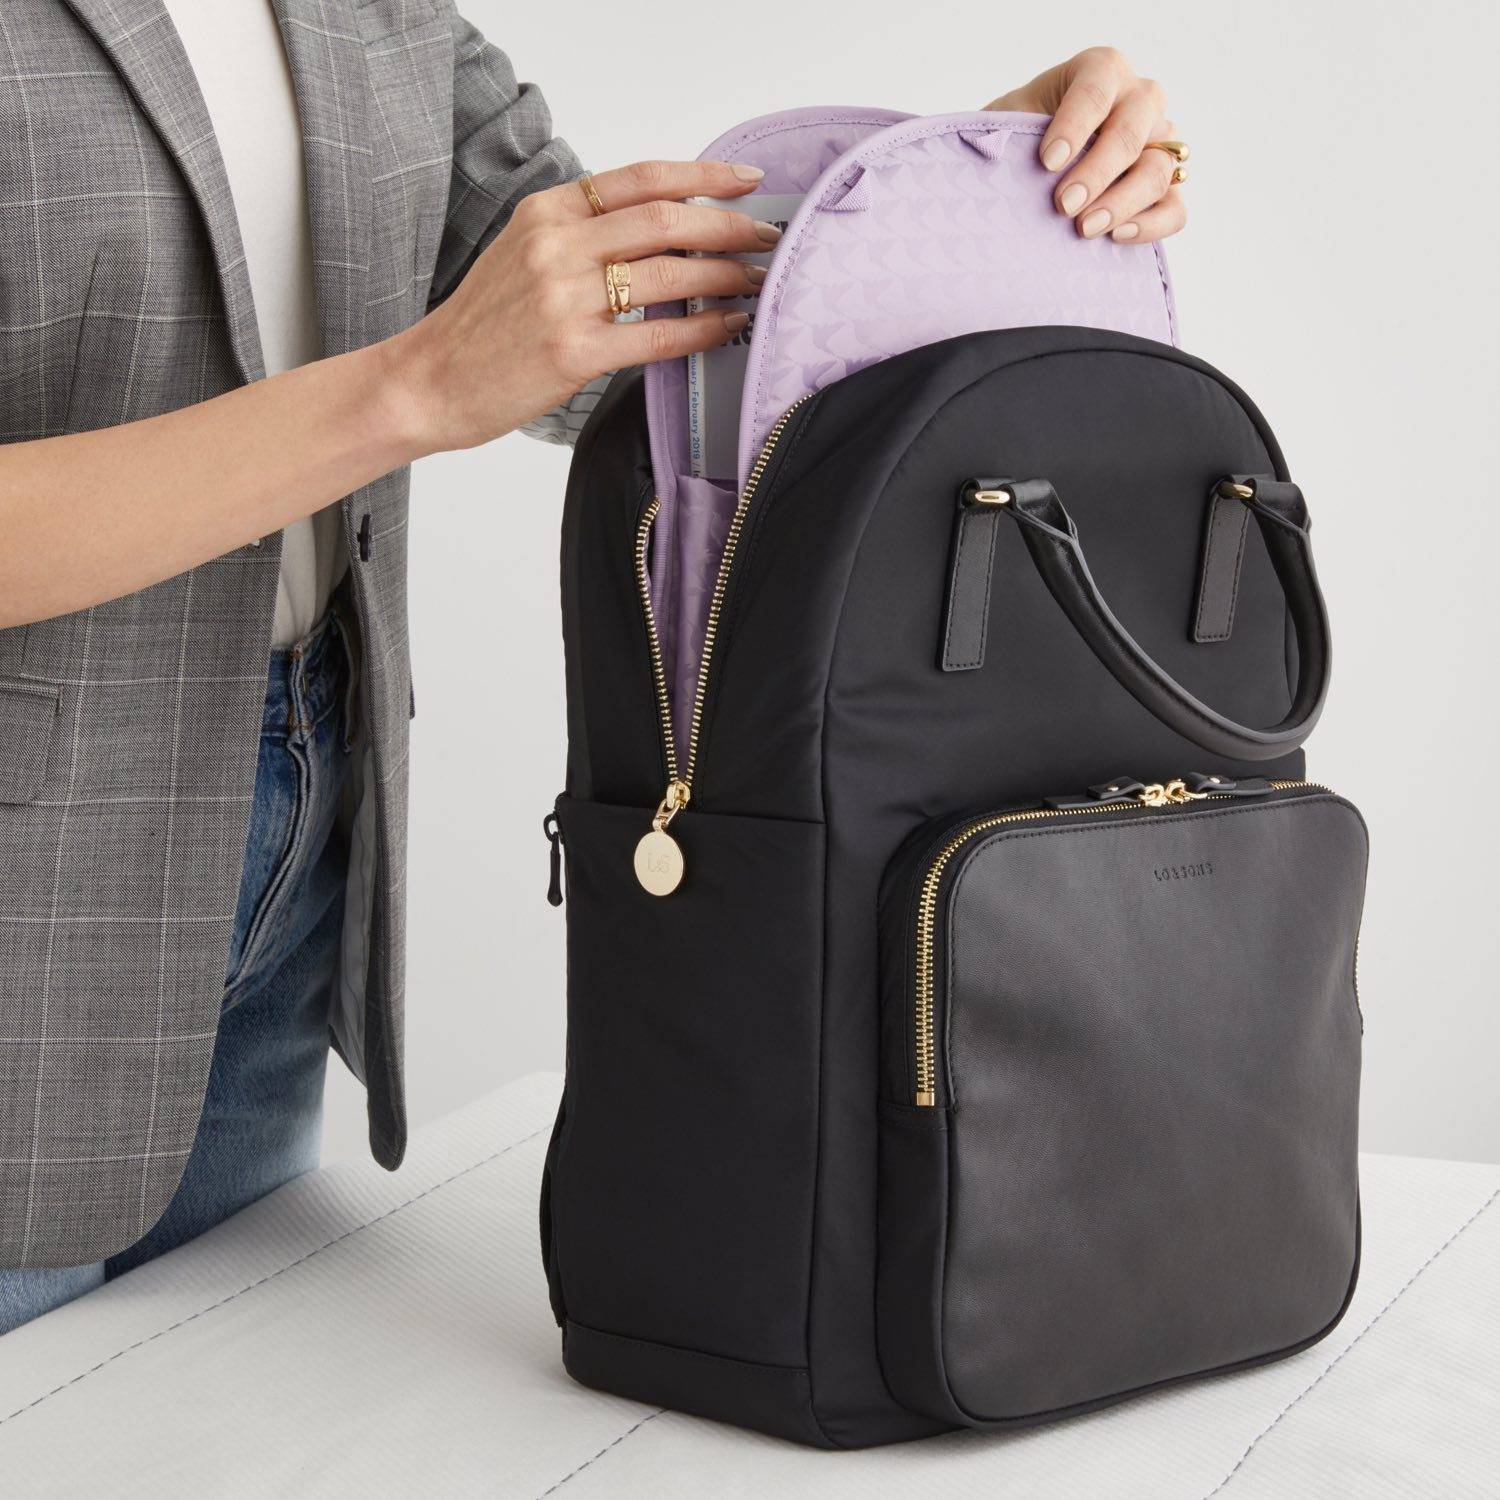 The Rowledge backpack by Lo and Sons